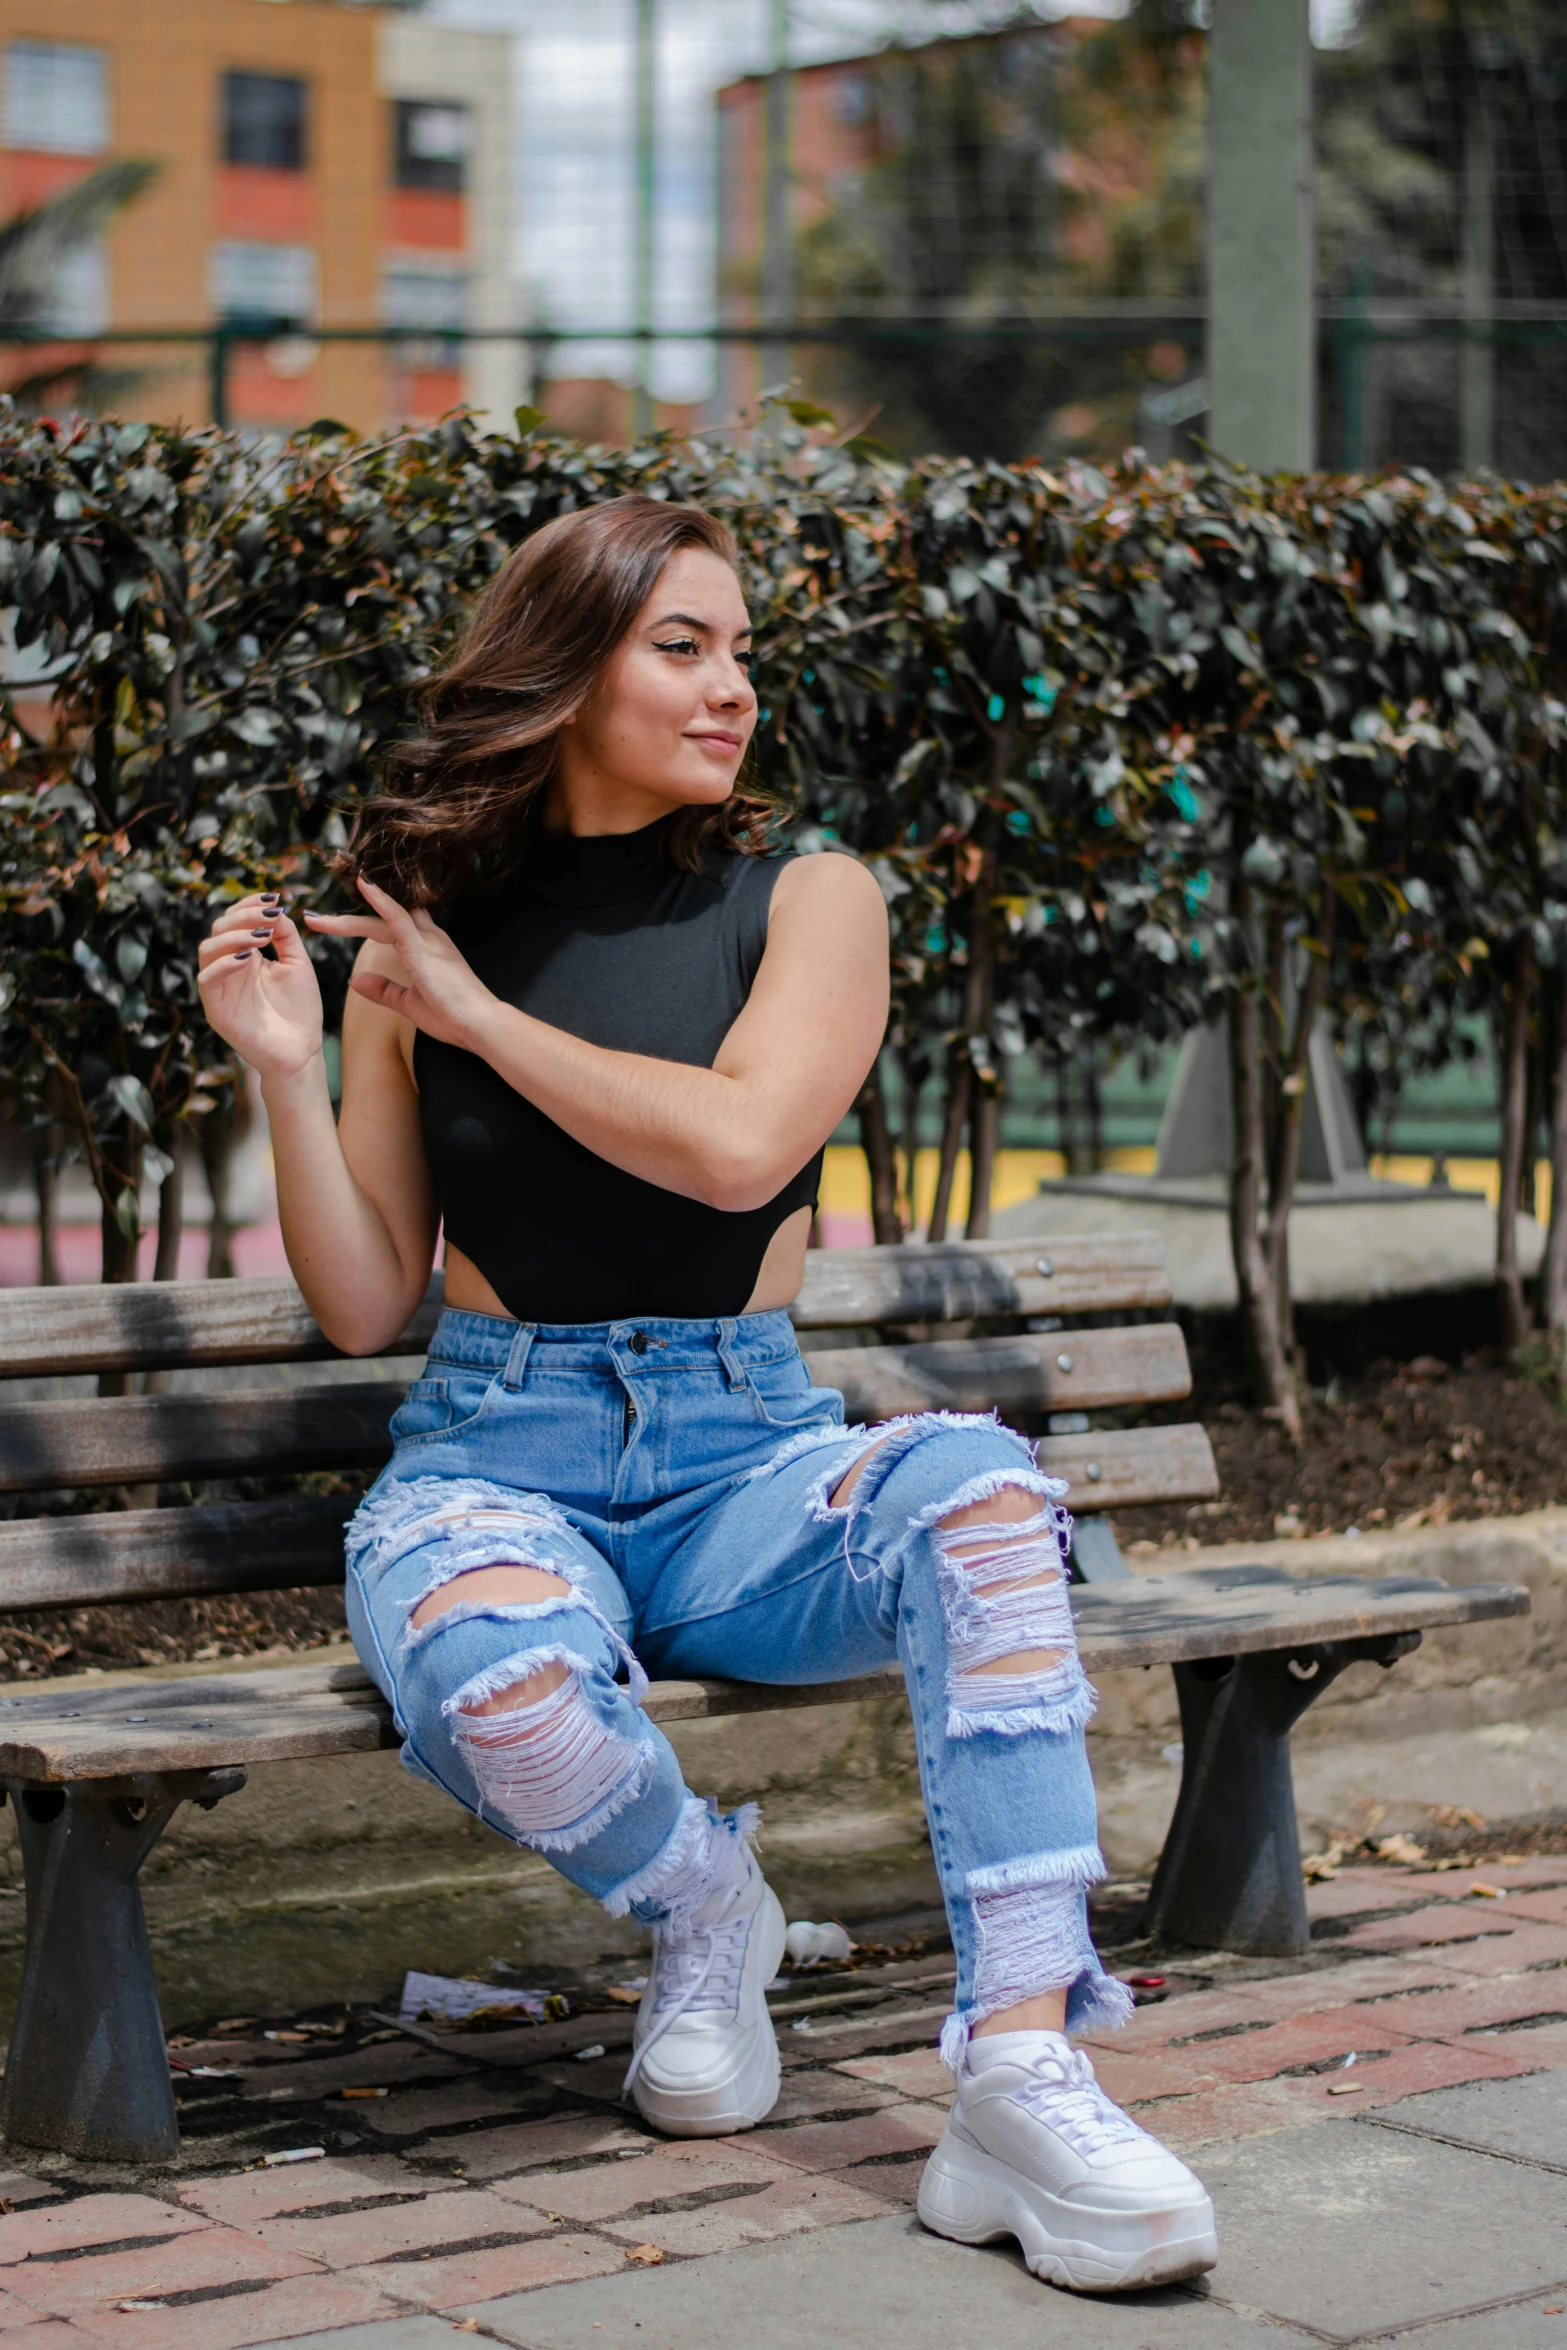 a young woman with ripped jeans, black tank top and sneakers sitting on a bench